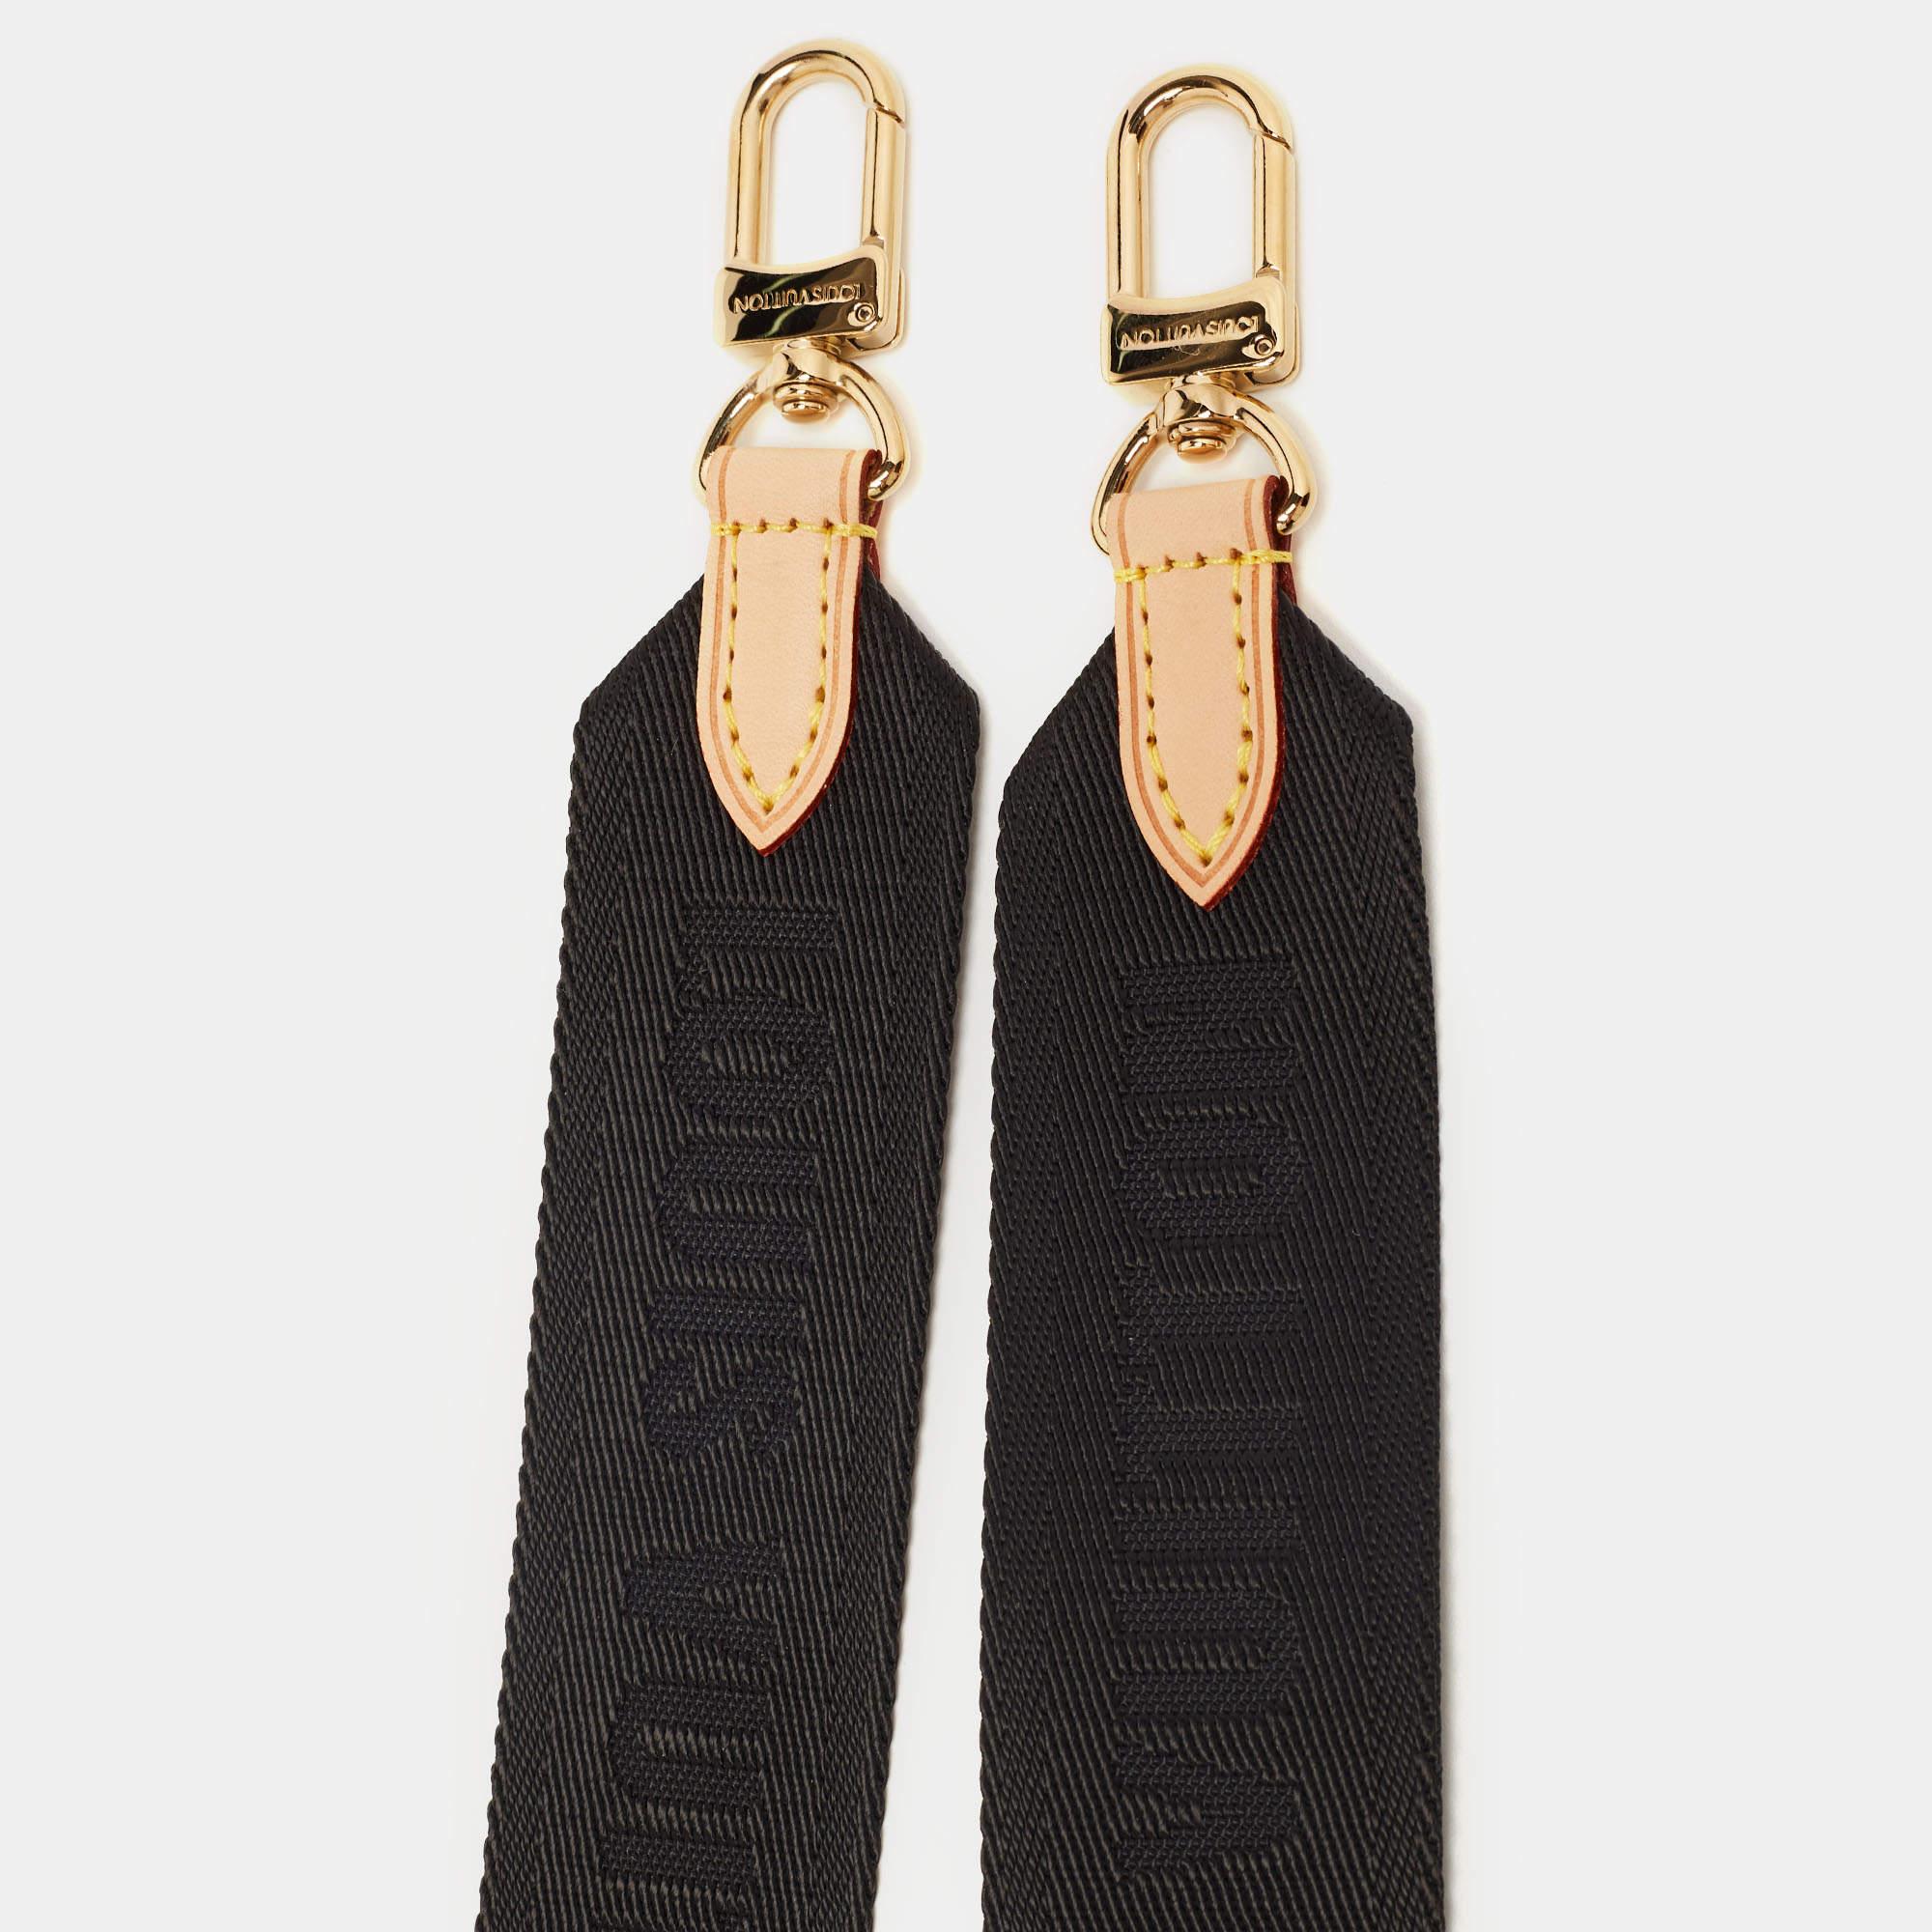 Accentuate the appearance of your favorite LV handbags with this super-trendy Bandoulière shoulder strap from Louis Vuitton. It is made from coated canvas with distinct gold-toned hardware adorning its fittings. This belt has an adjustable length of